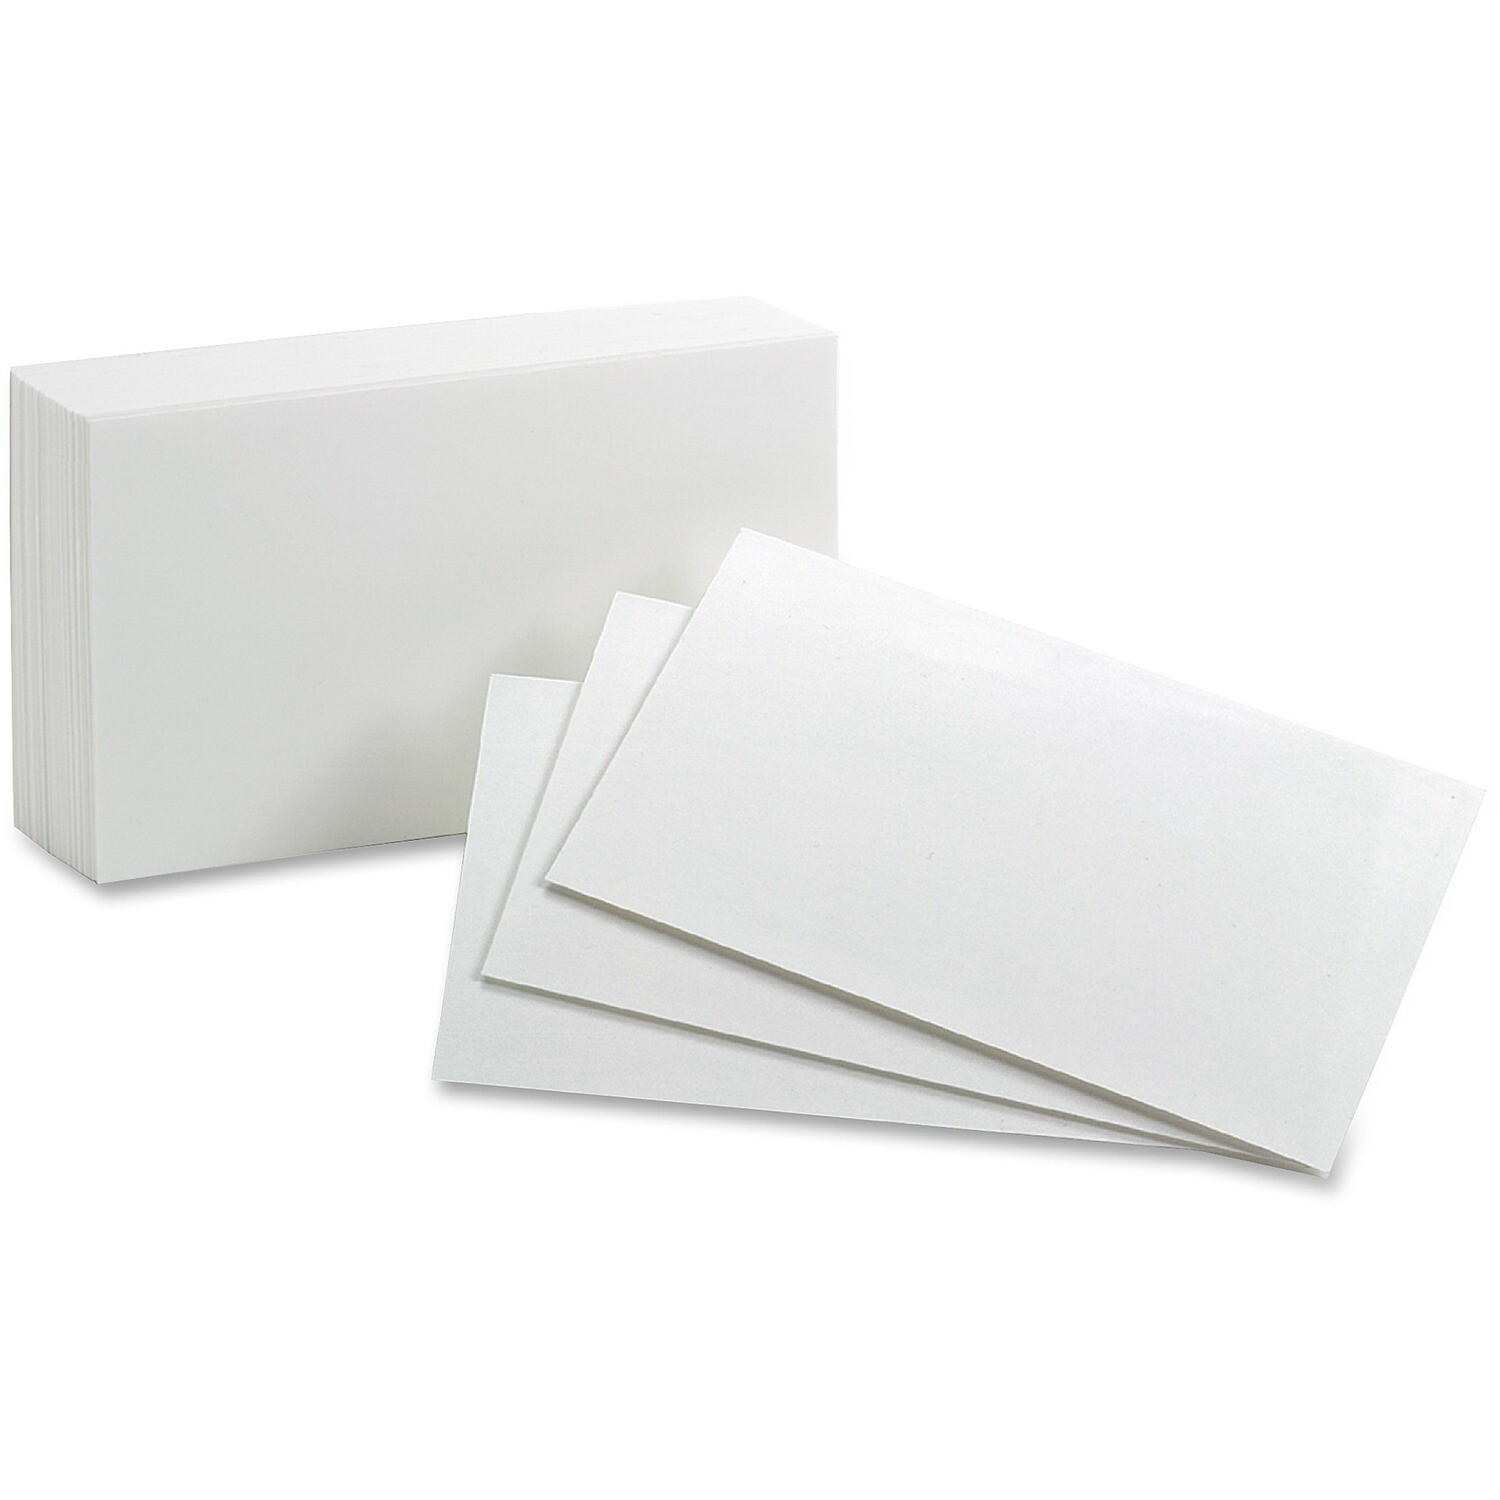 Index Cards, Plain, White 3" x 5", 100 Pack, Oxford